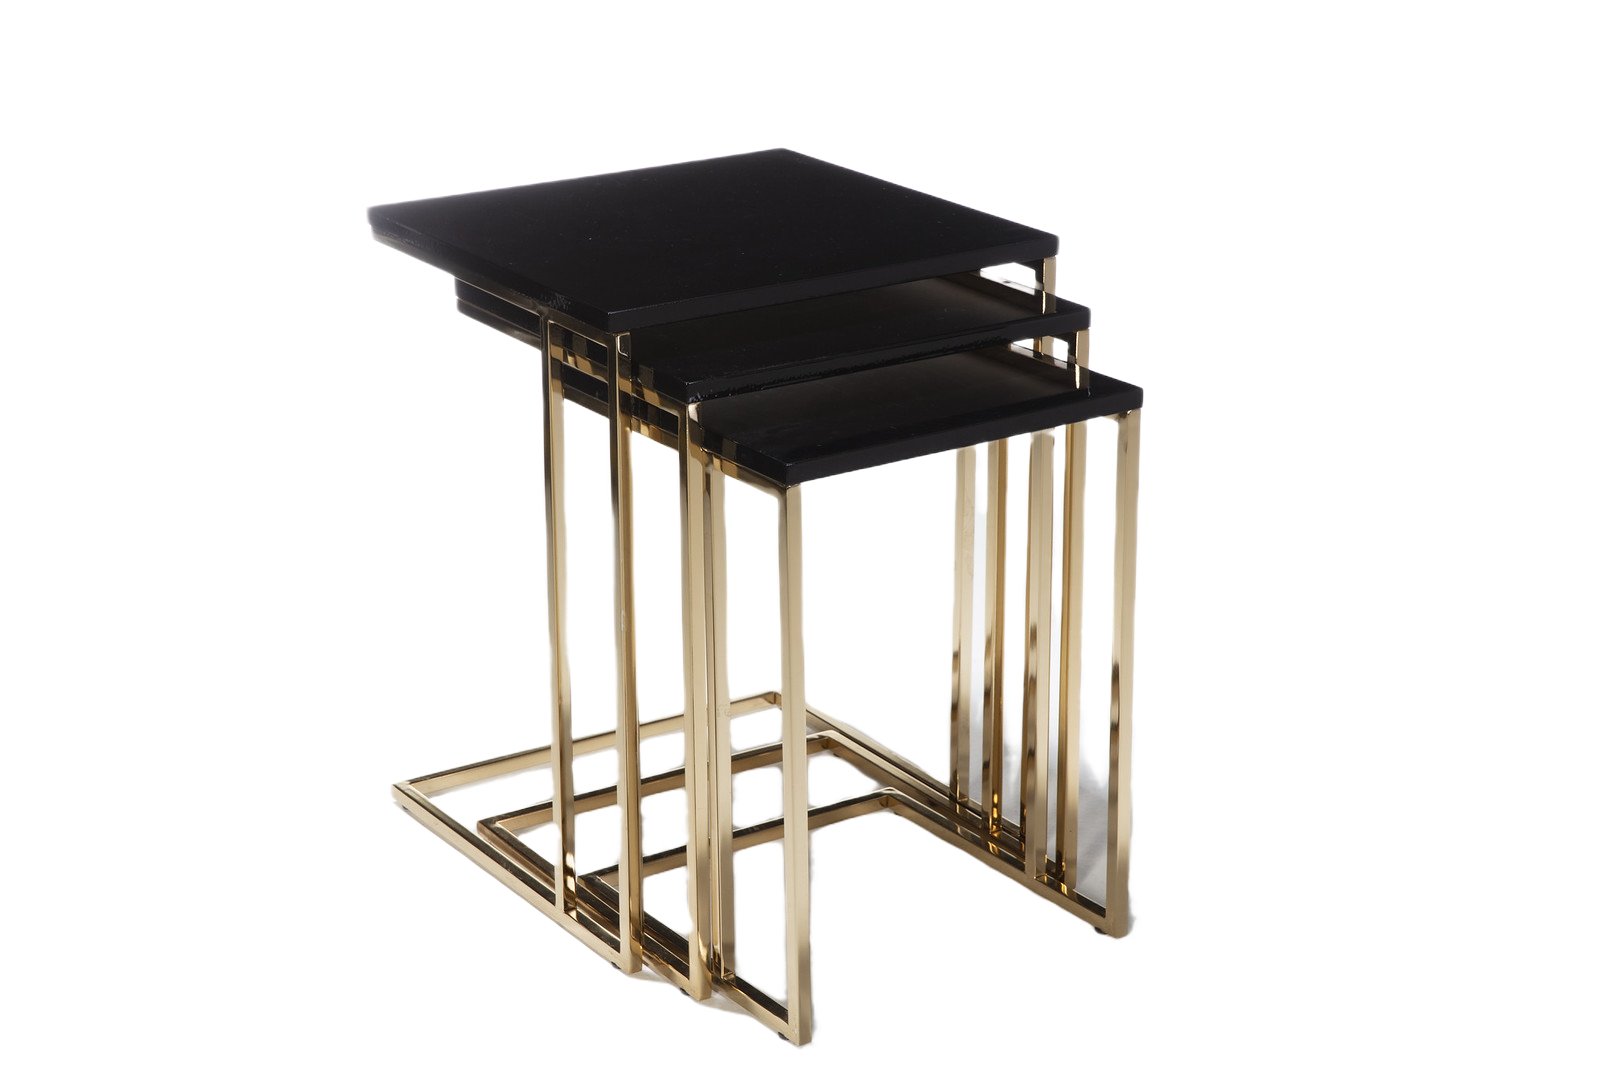 Carlino Nesting Table by Bellona